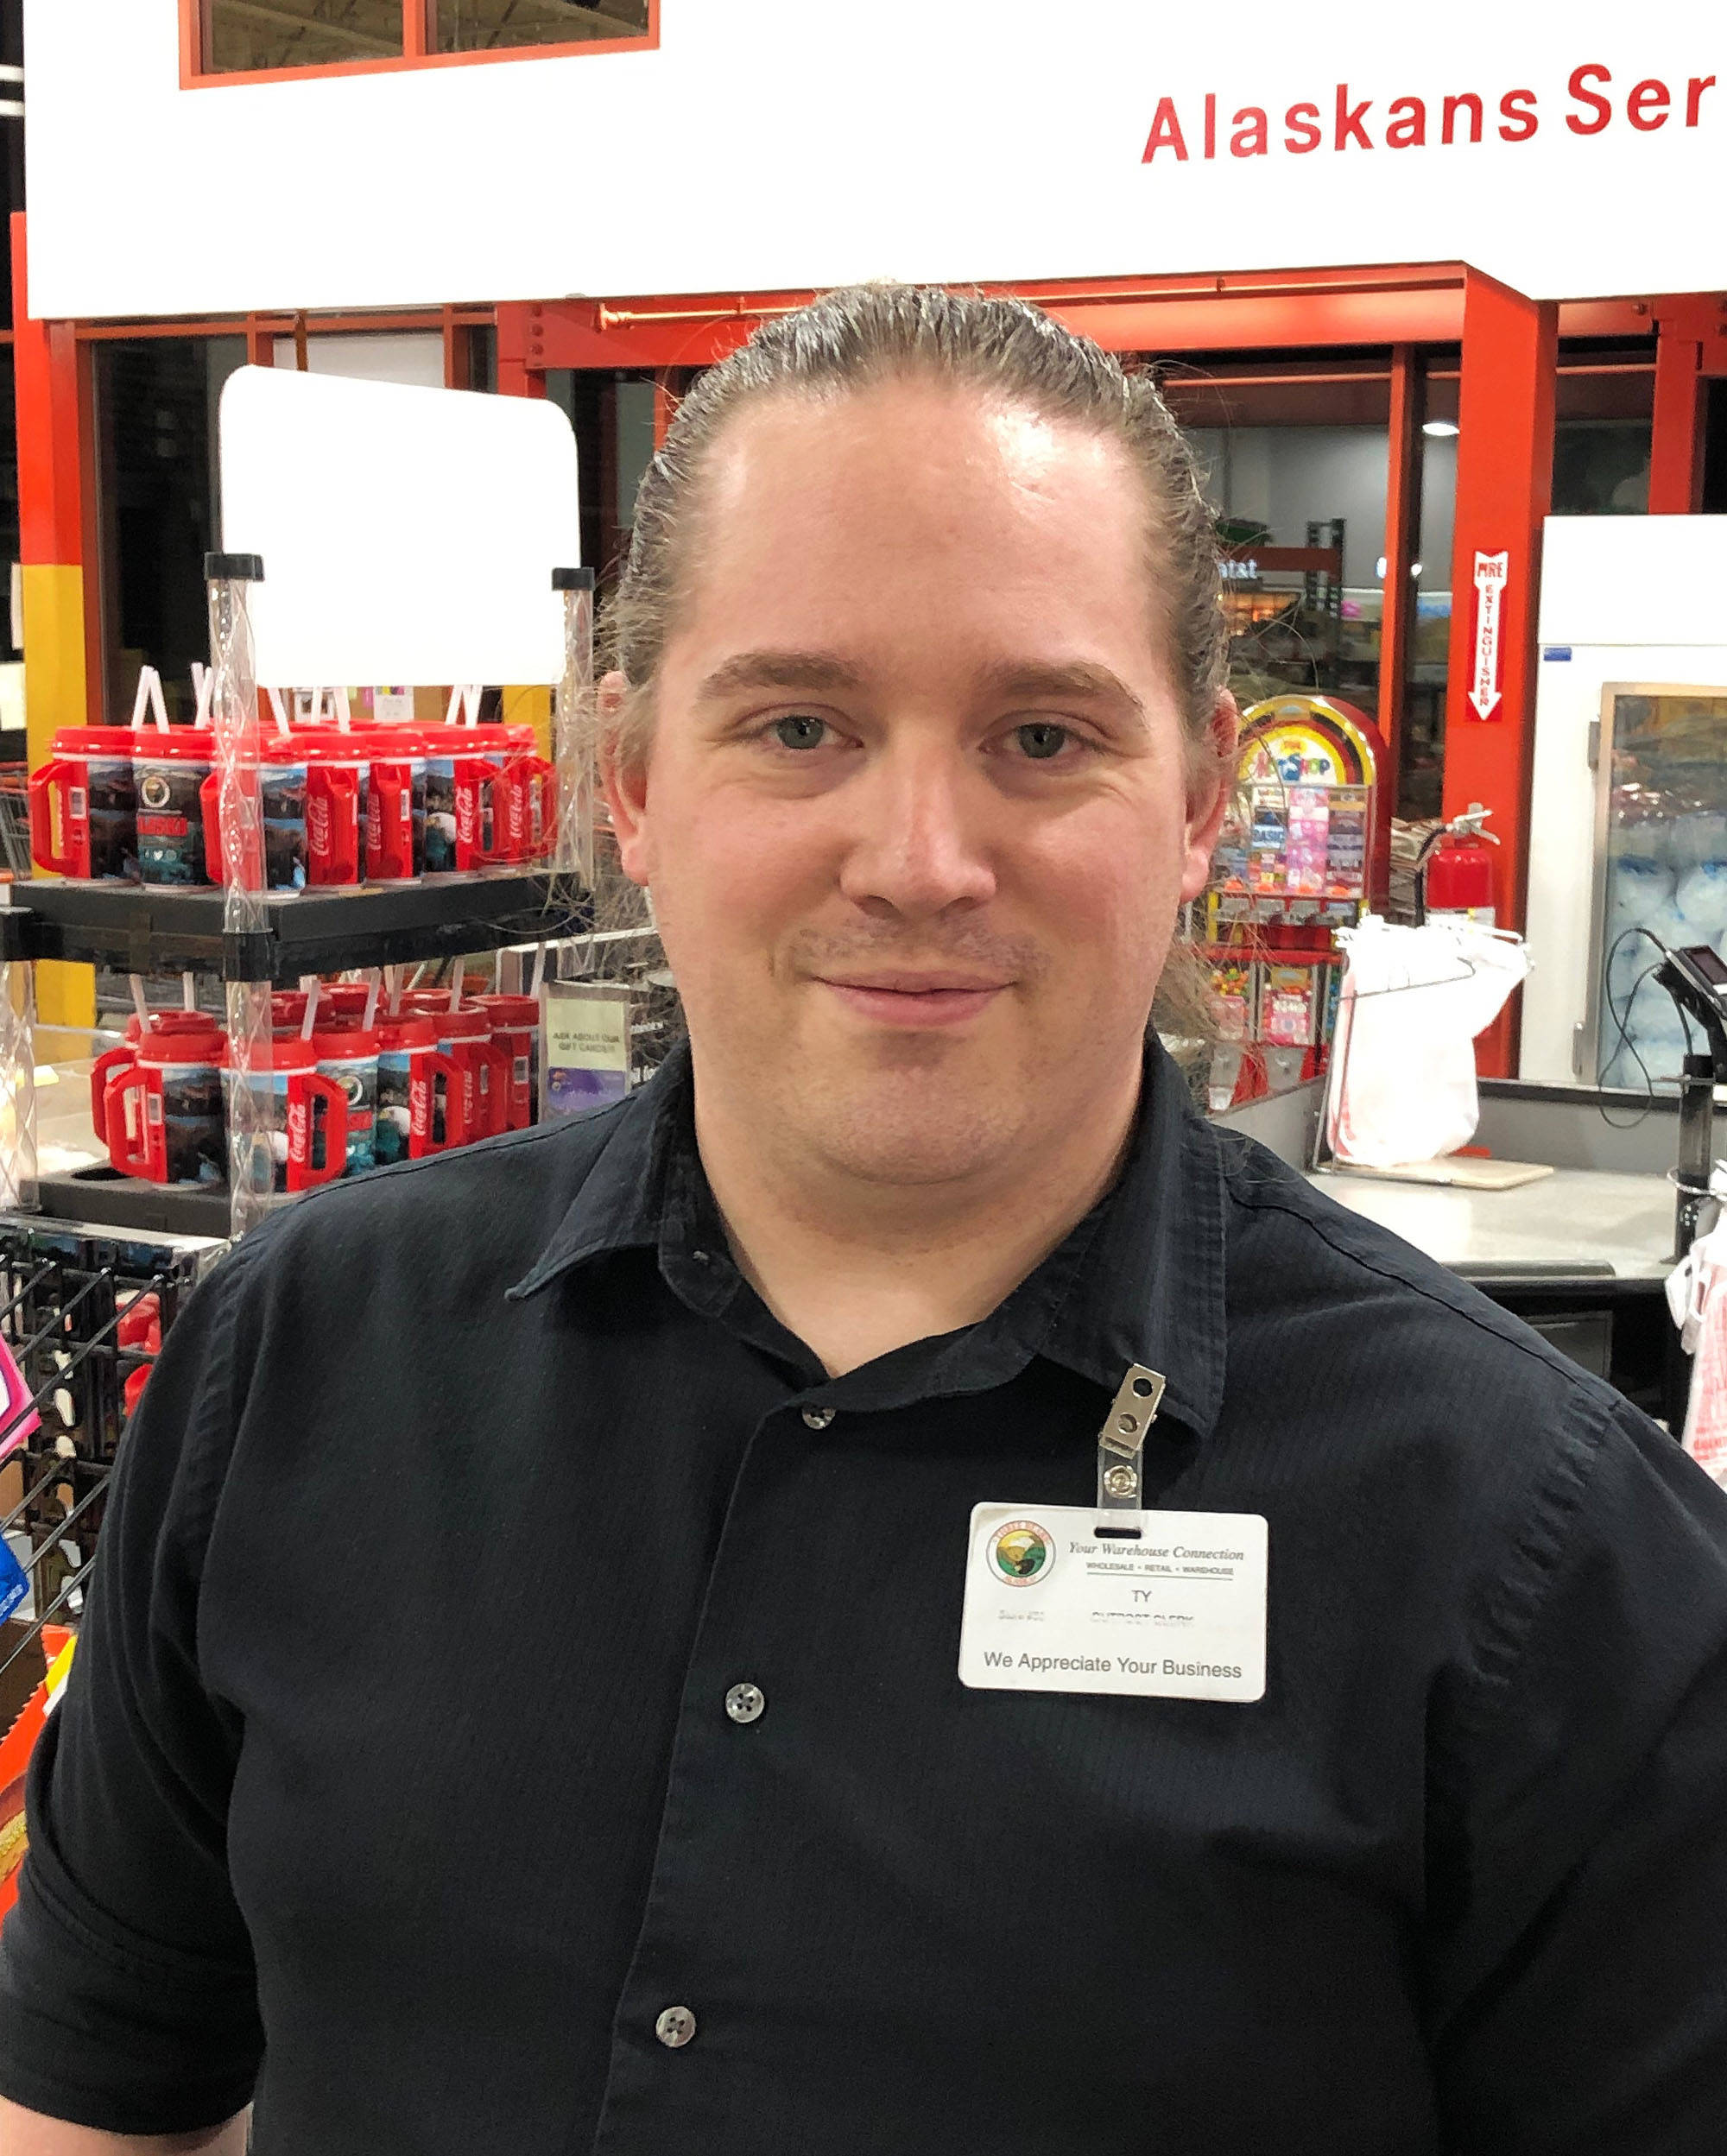 “Going for less sugar in my life. I’m going to be a little smarter shopping, cut things out like sweetened drinks. I have a sweet tooth.”                                — Ty Grenier, Soldotna